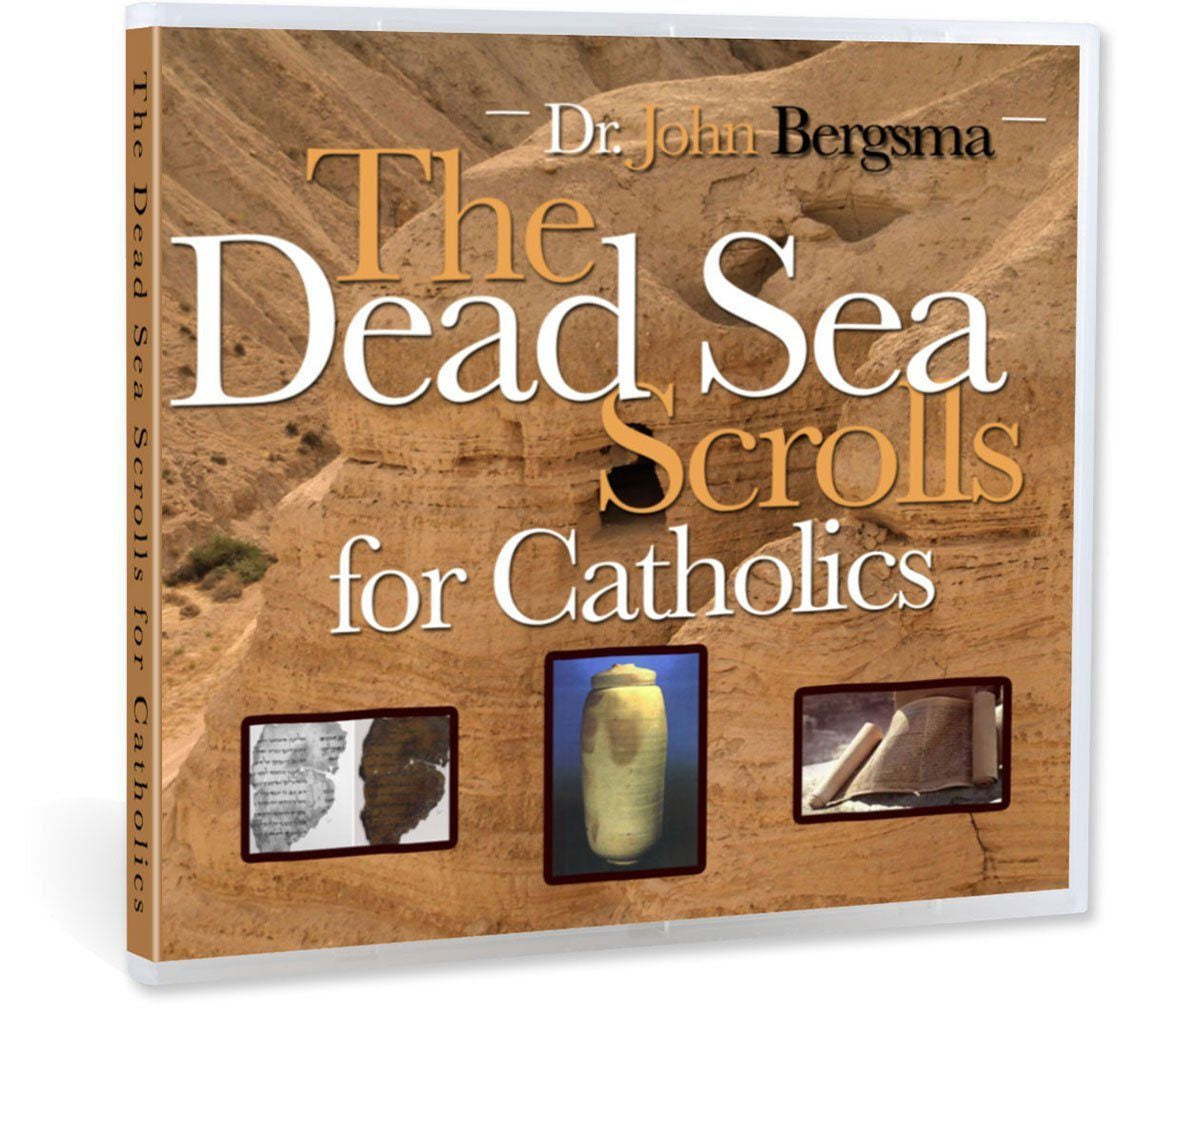 Get a brief few hour explanation of the Dead Sea Scrolls: What are they, how they were found, what difference does their finding make for our understanding of the Bible (CD).